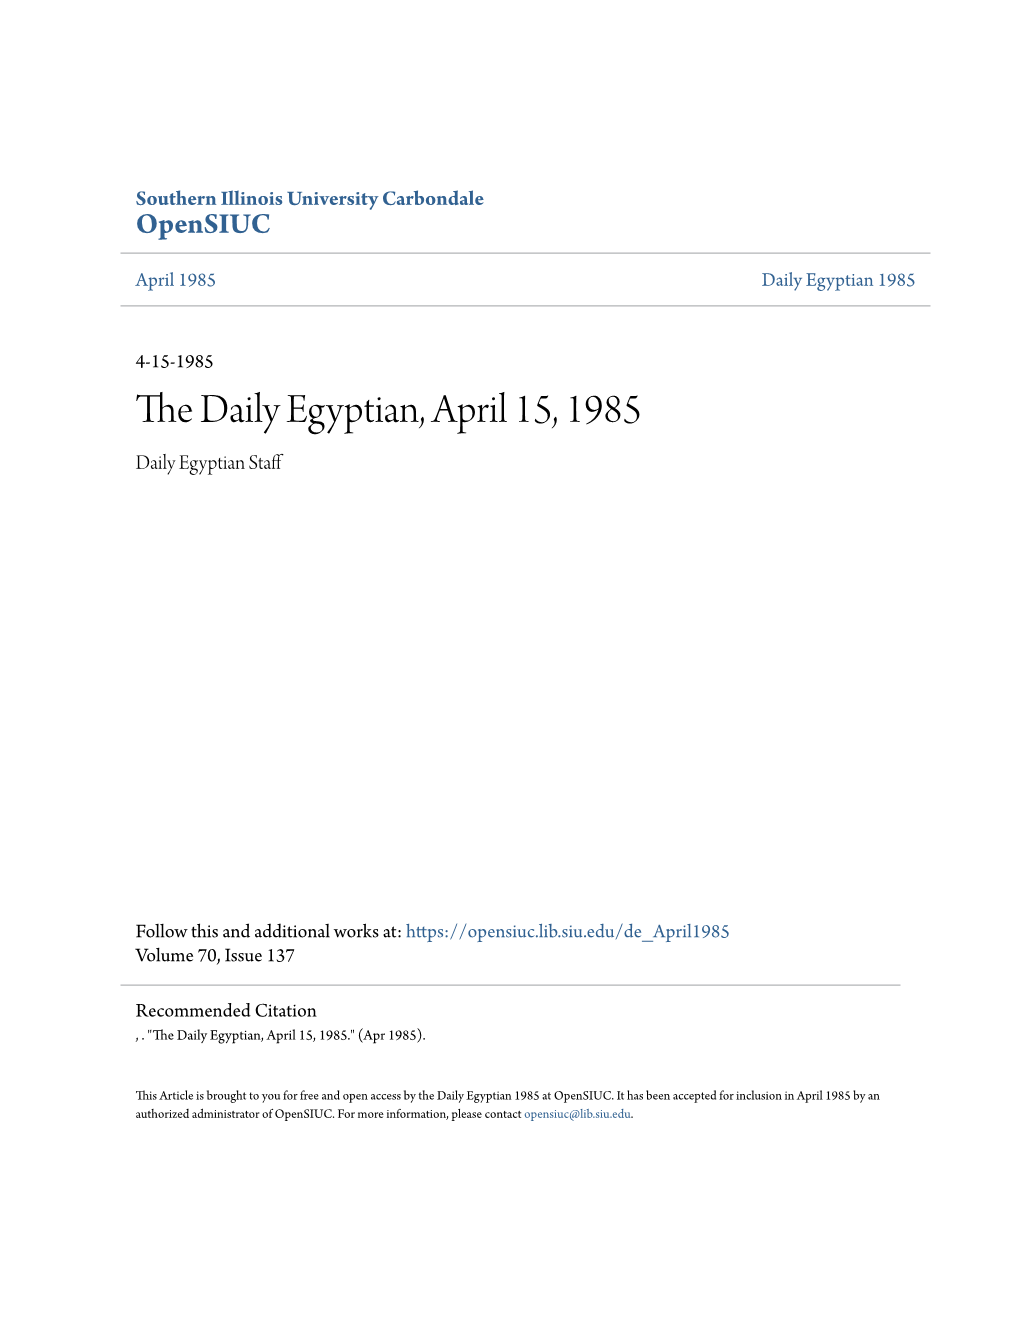 The Daily Egyptian, April 15, 1985